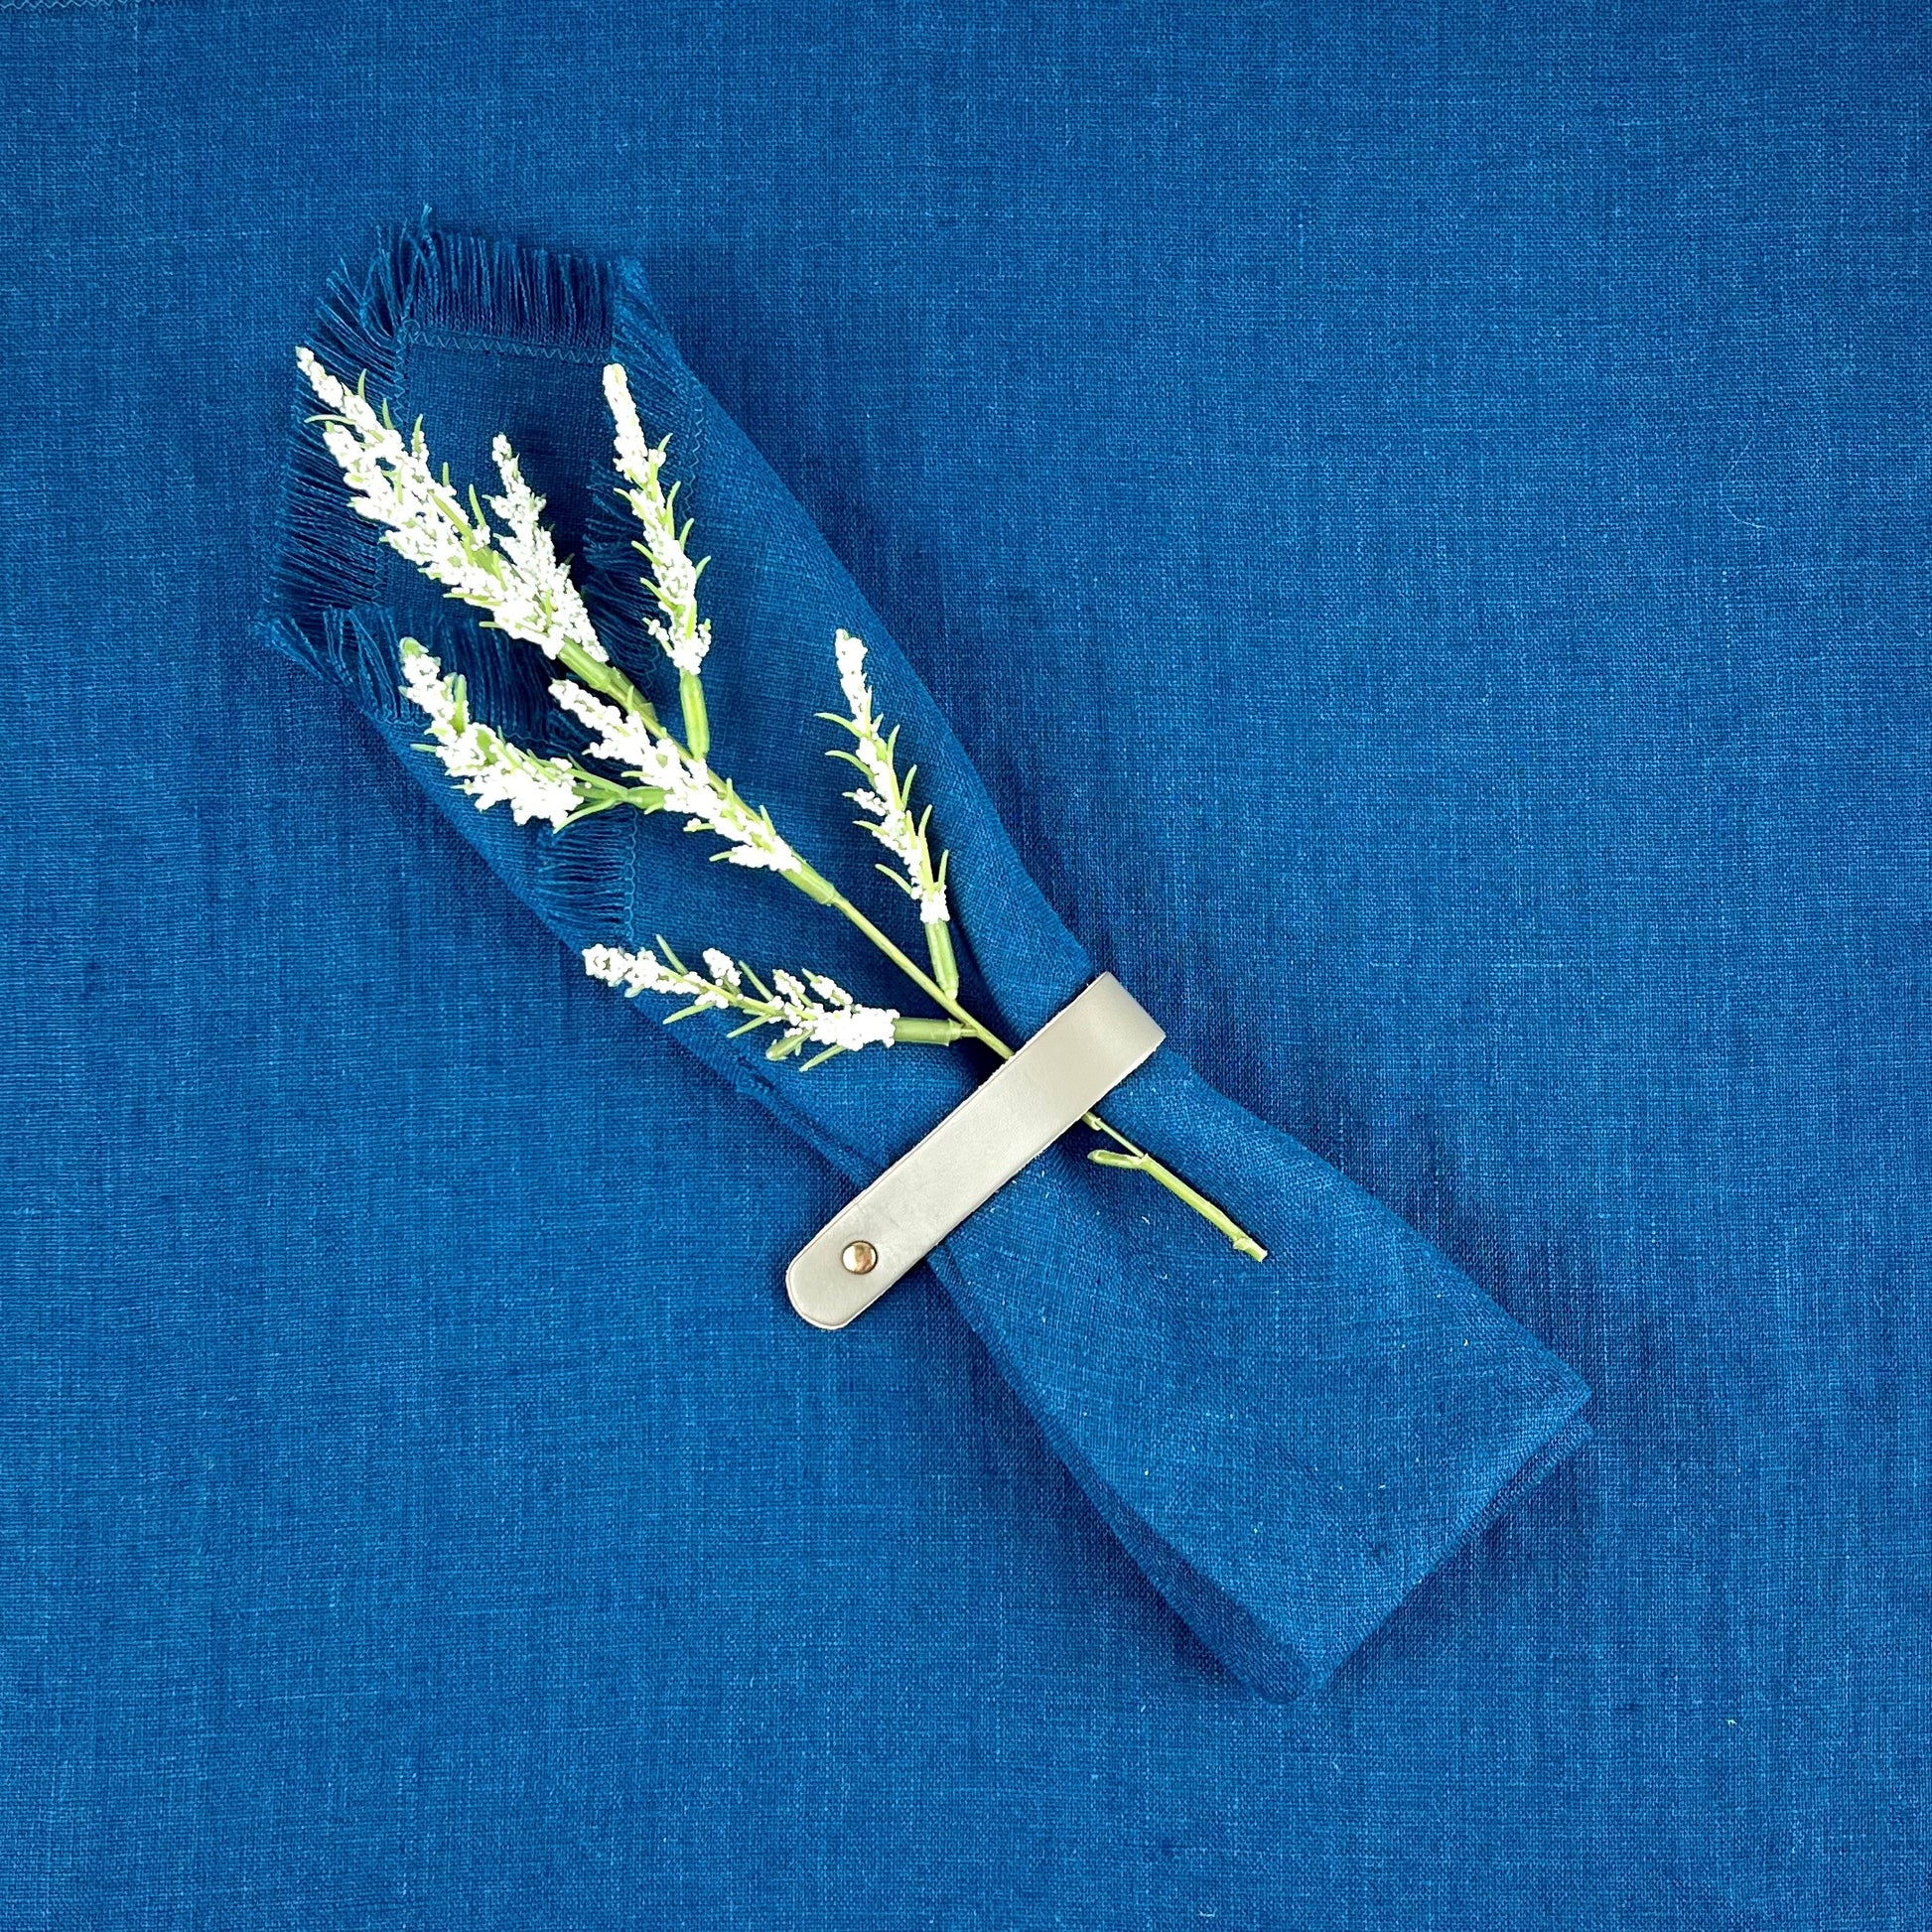 Deep Blue Linen Napkins with one folded on top with a plant sprig tucked in to a gray leather napkin ring